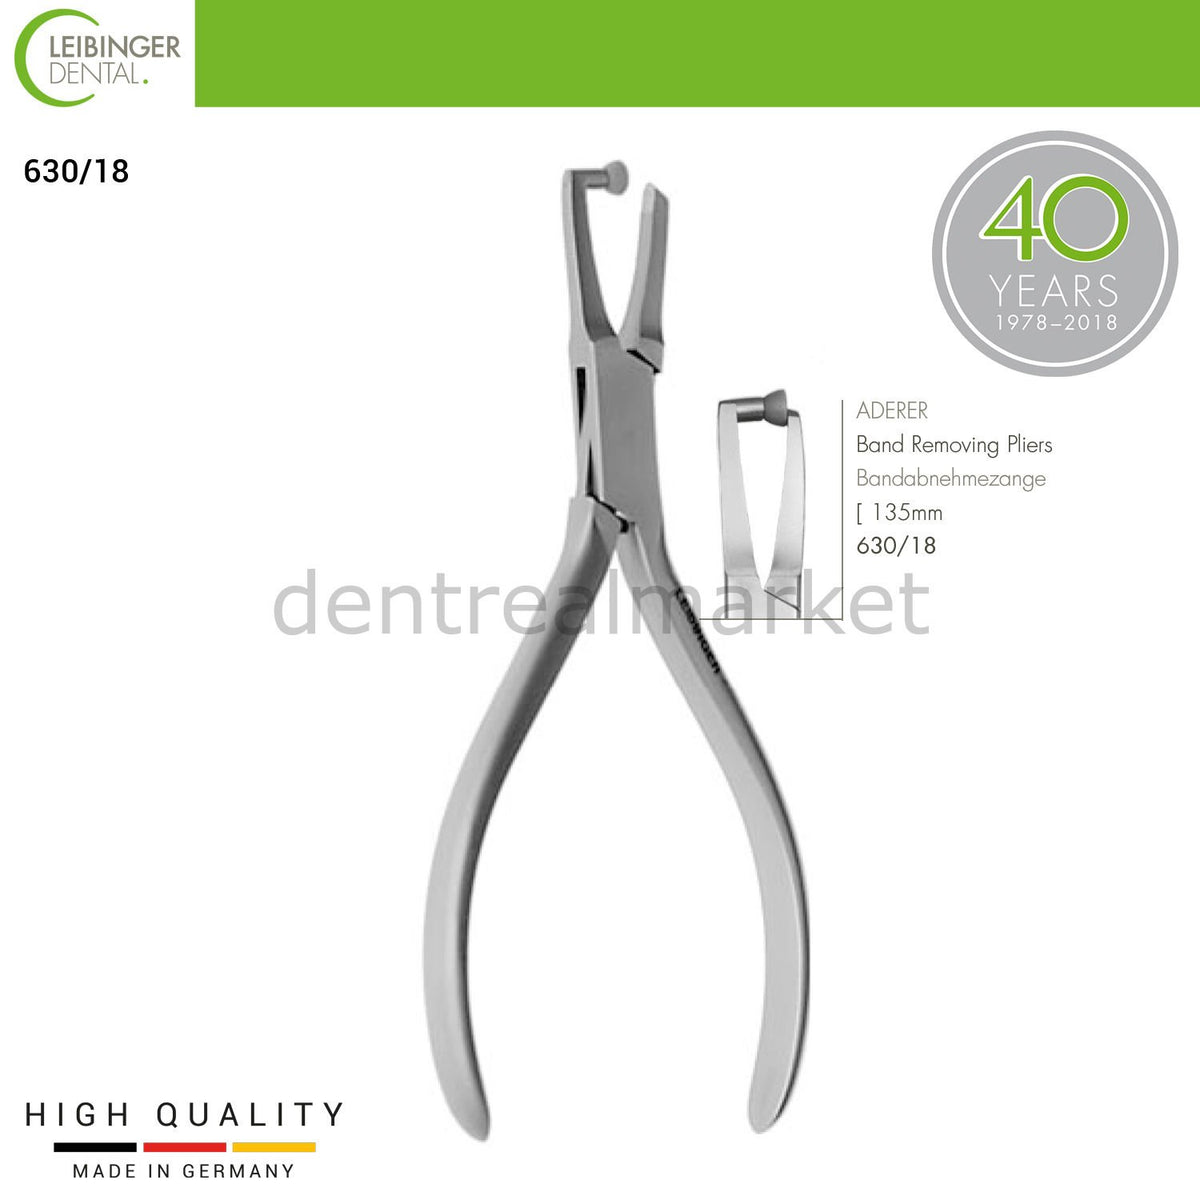 DentrealStore - Leibinger Aderer Band Removing Pliers - Tape Removal Pliers - 135 mm